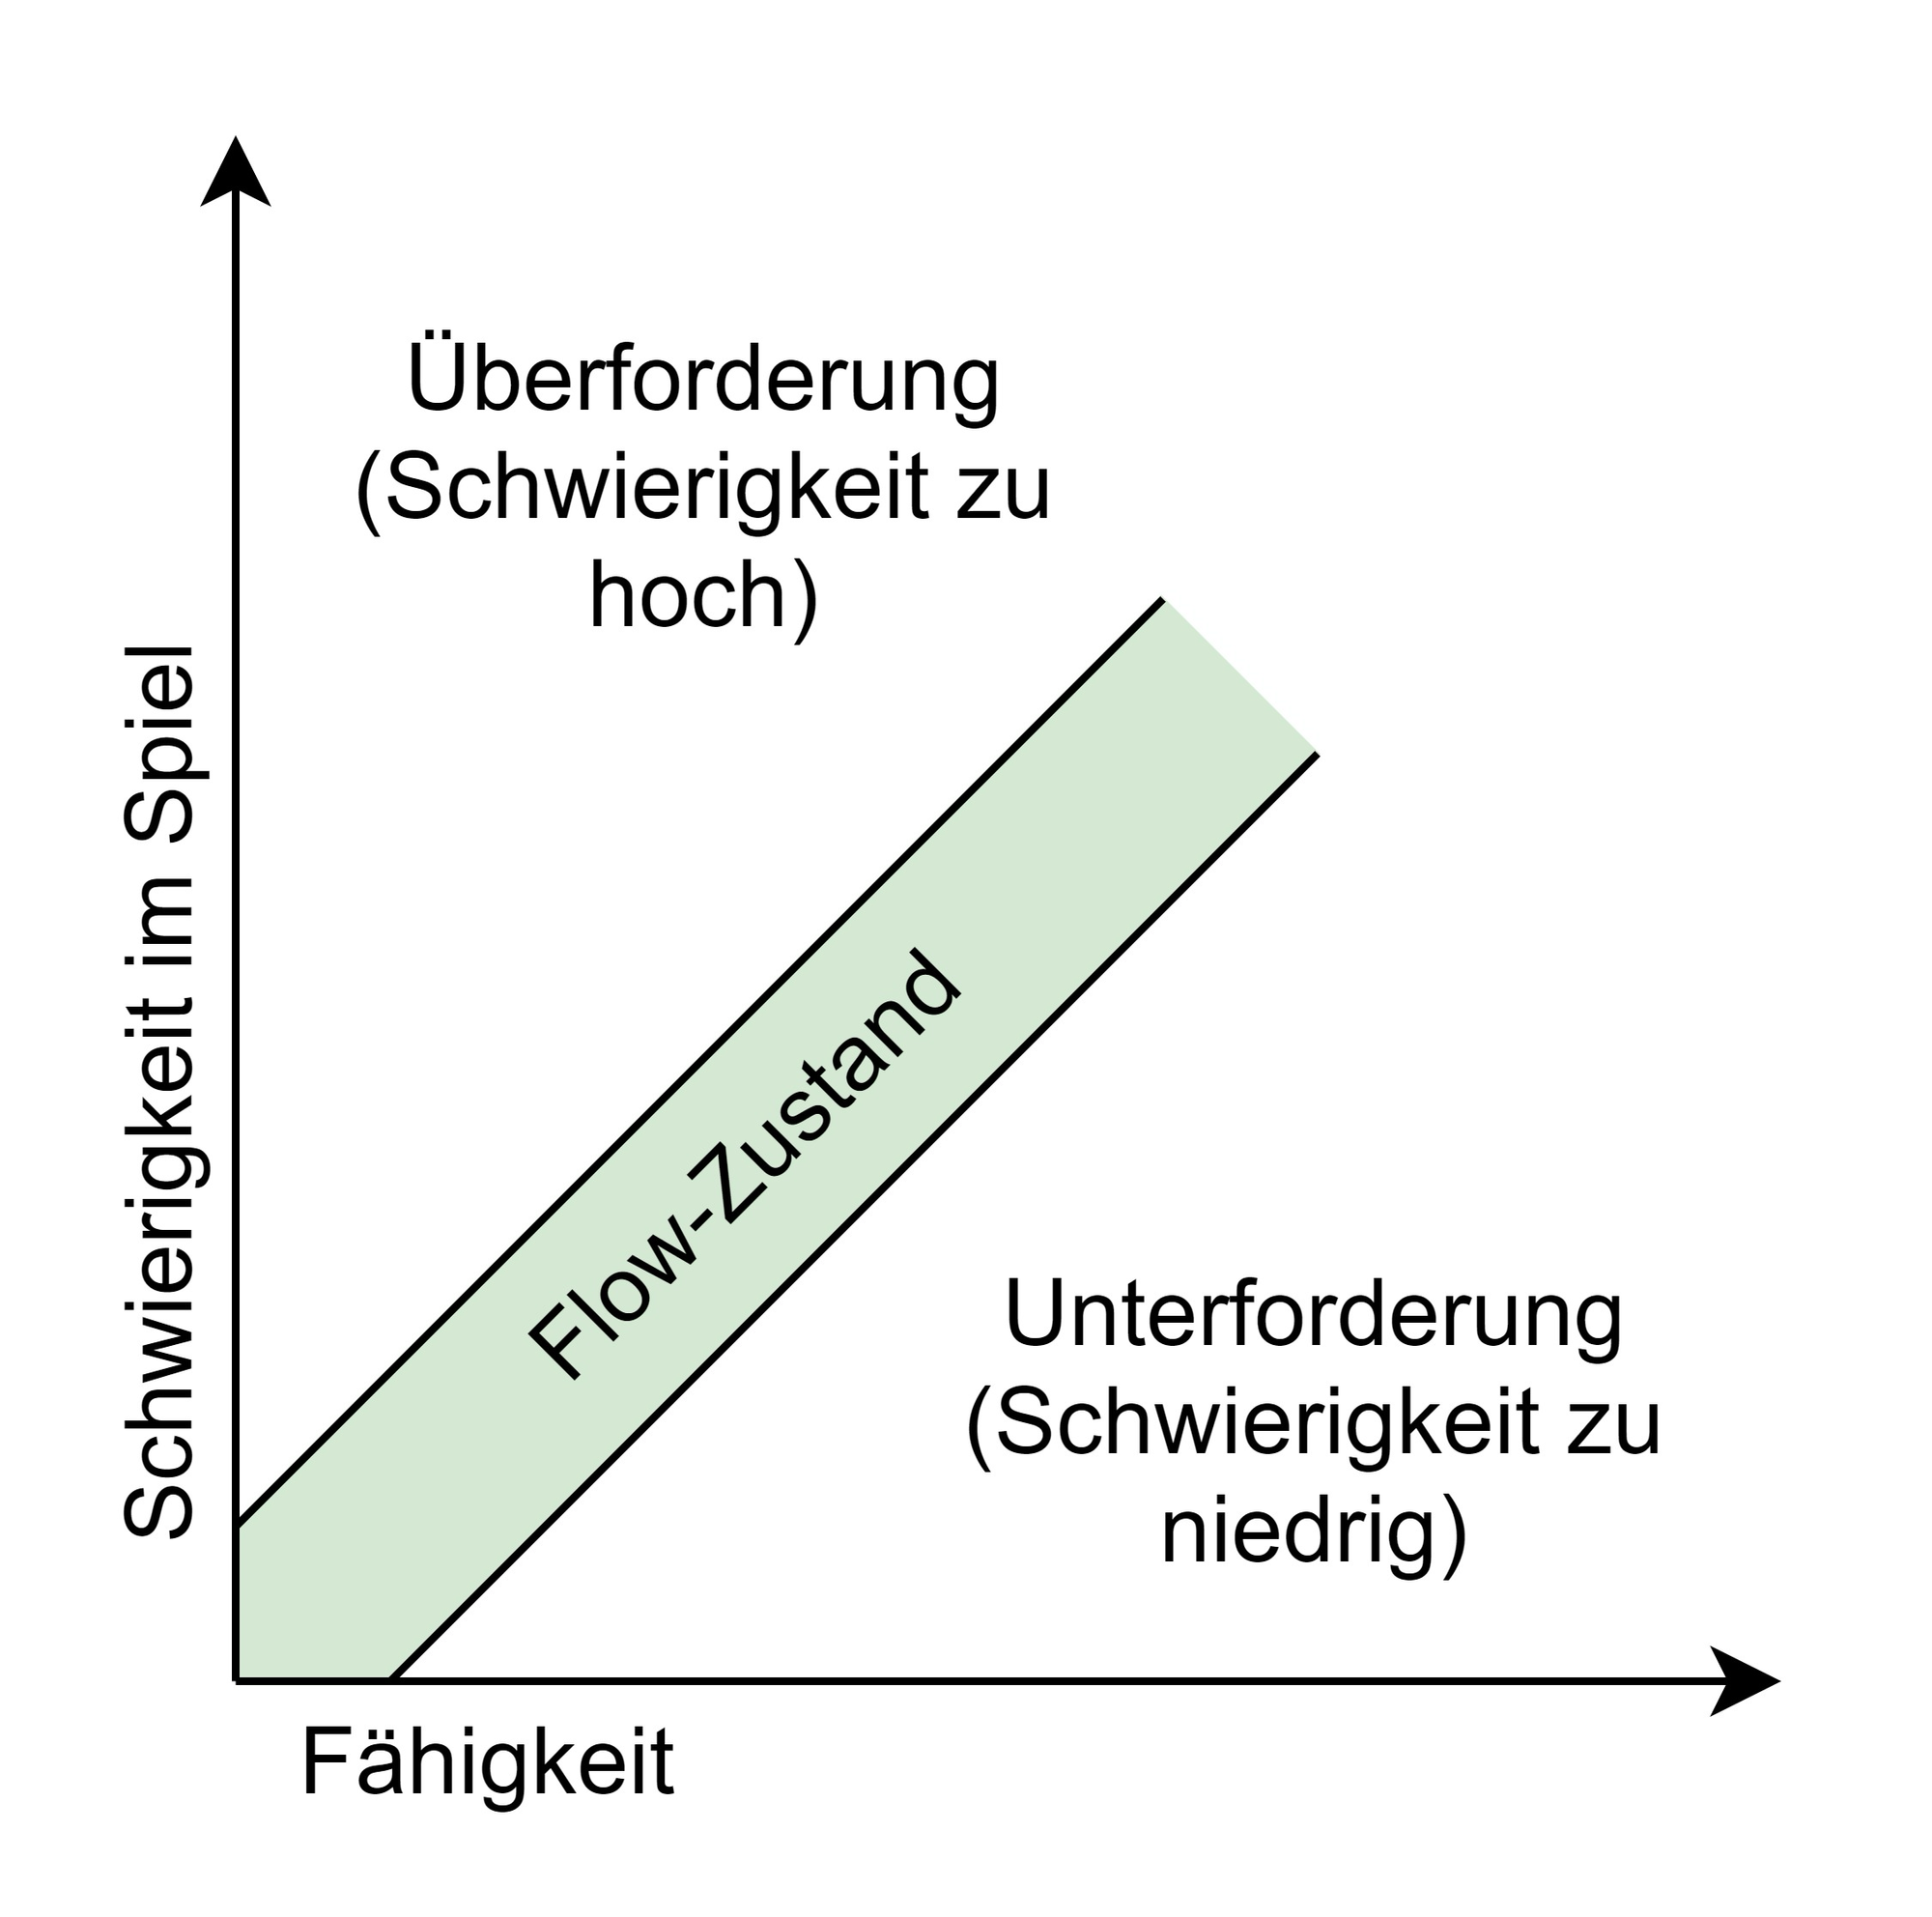 Flow state model for videogames. Based on Csikszentmihalyi work (2014, p.107) [2]